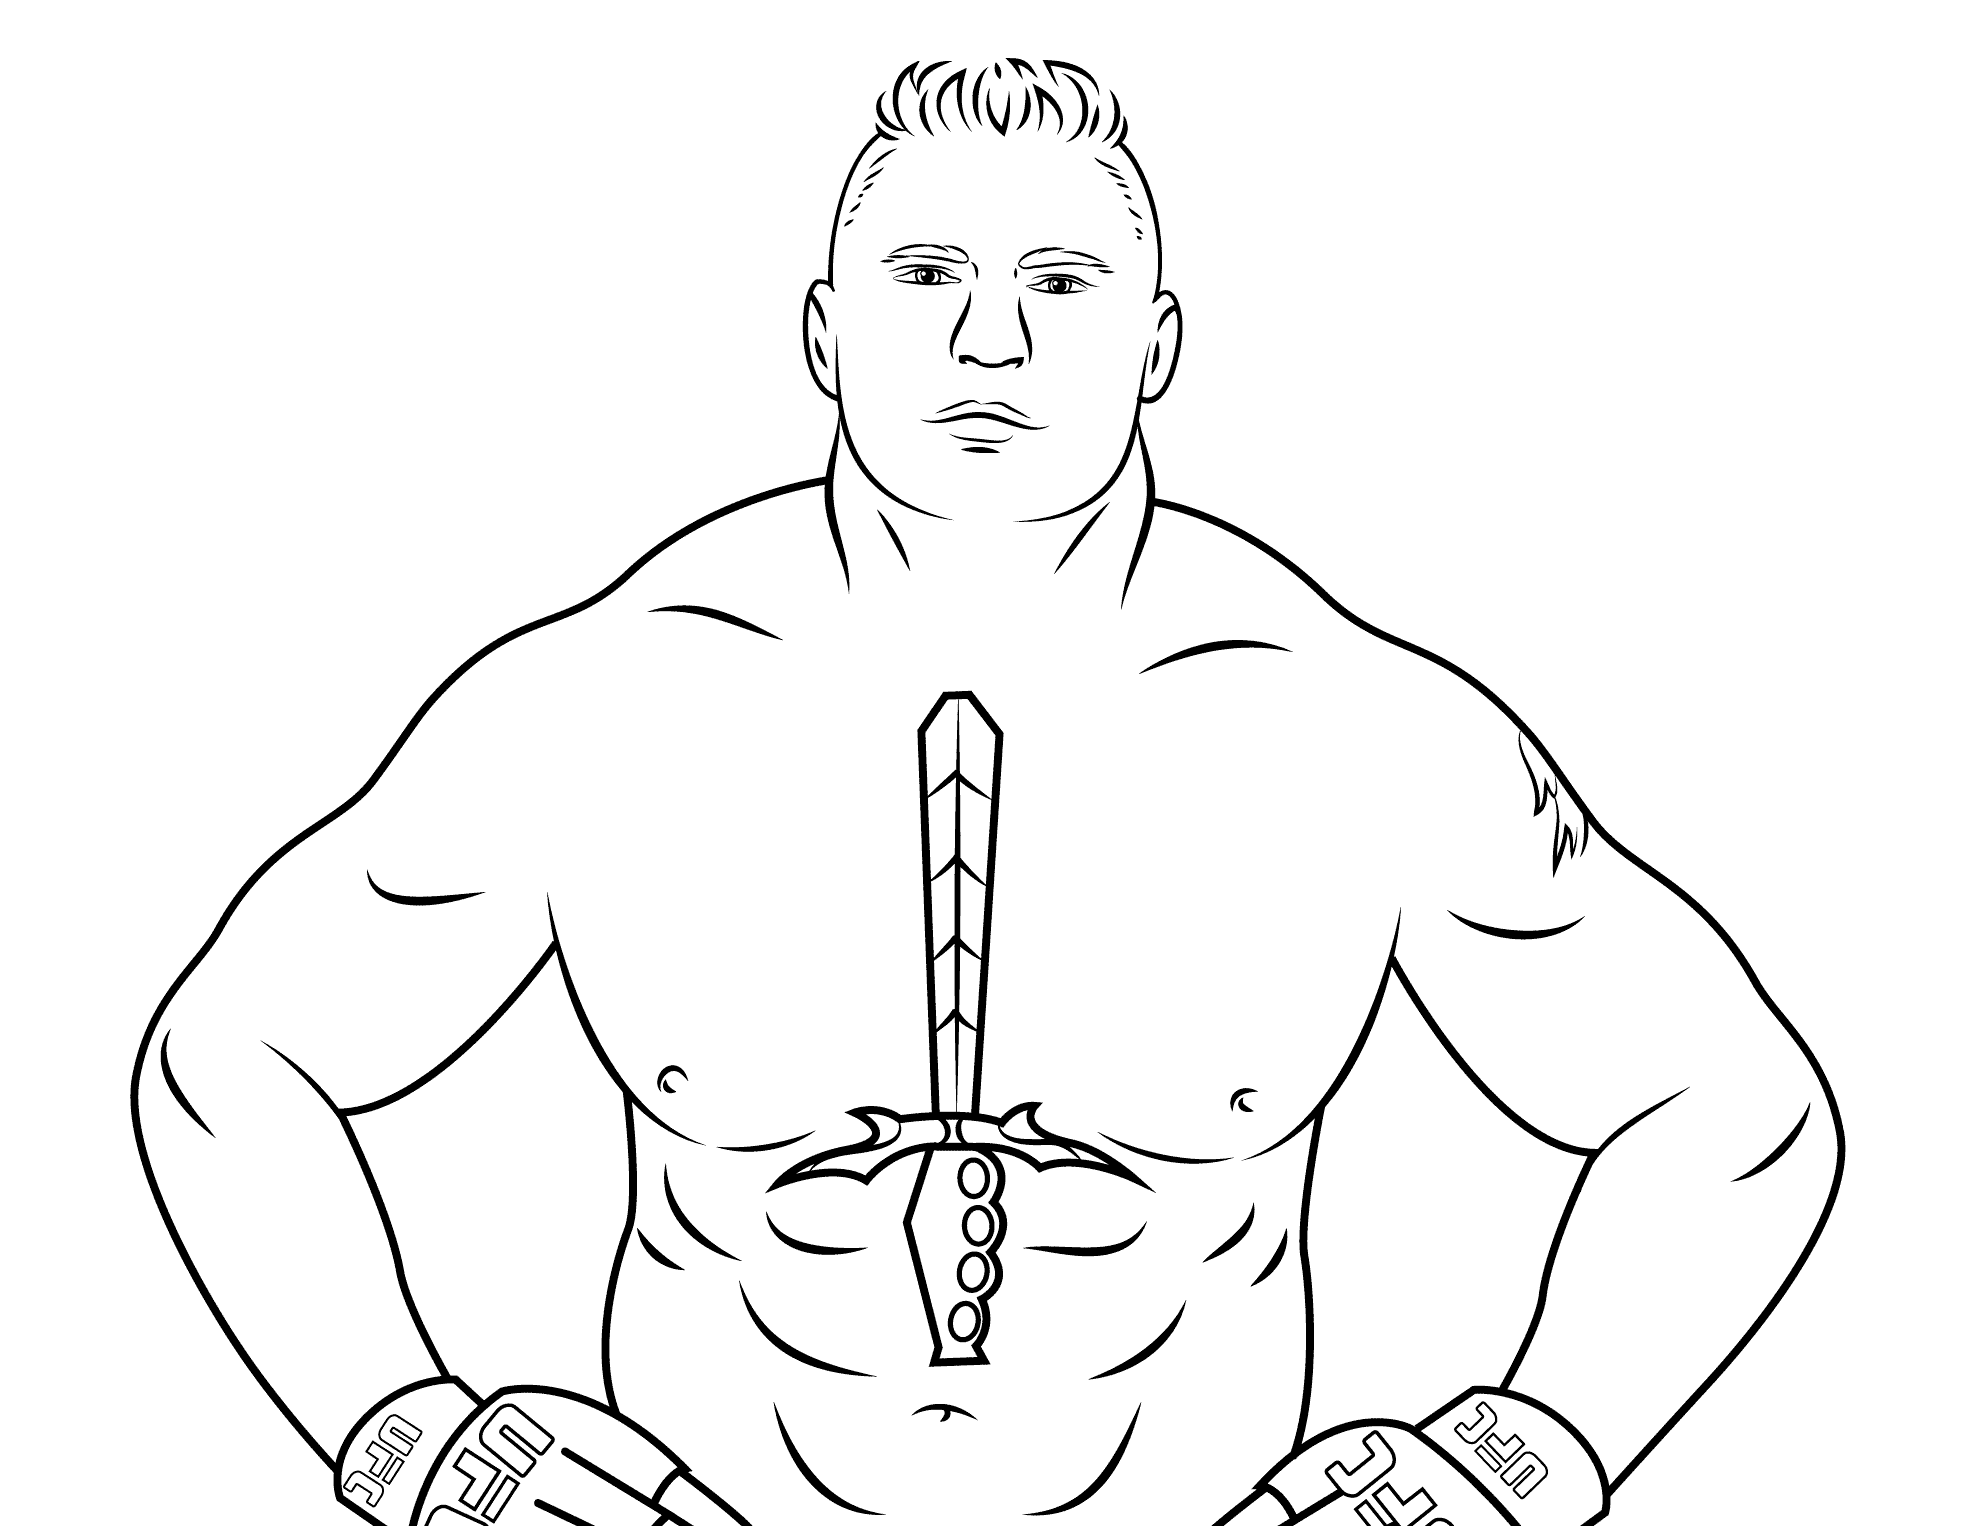 Wwe Brock Lesnar Coloring Page Coloring Page